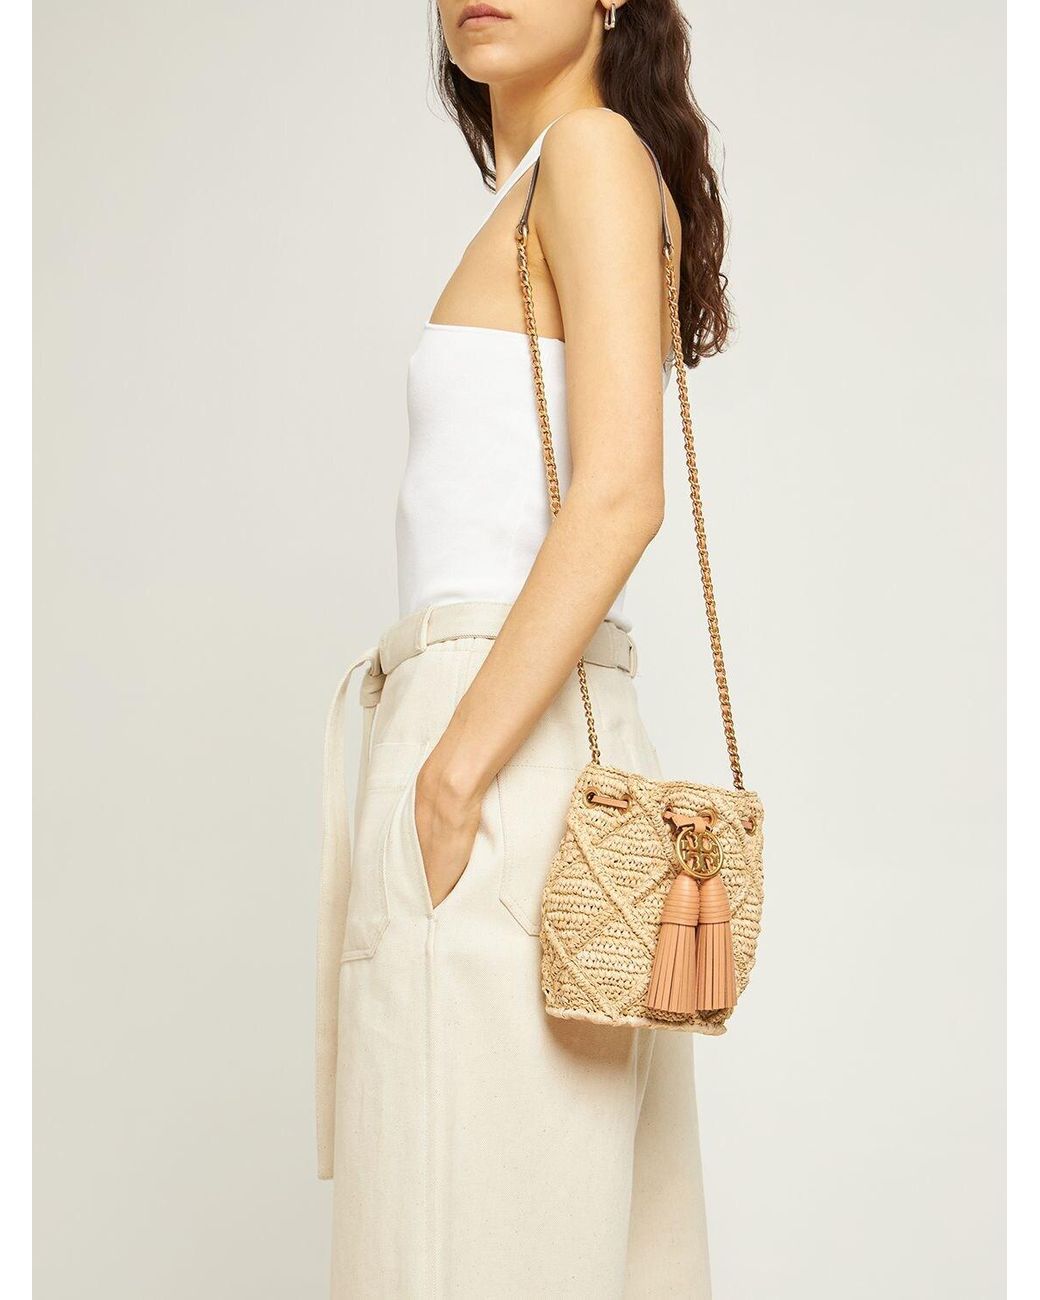 Tory Burch Mini Fleming Straw & Leather Bucket Bag in Natural | Lyst